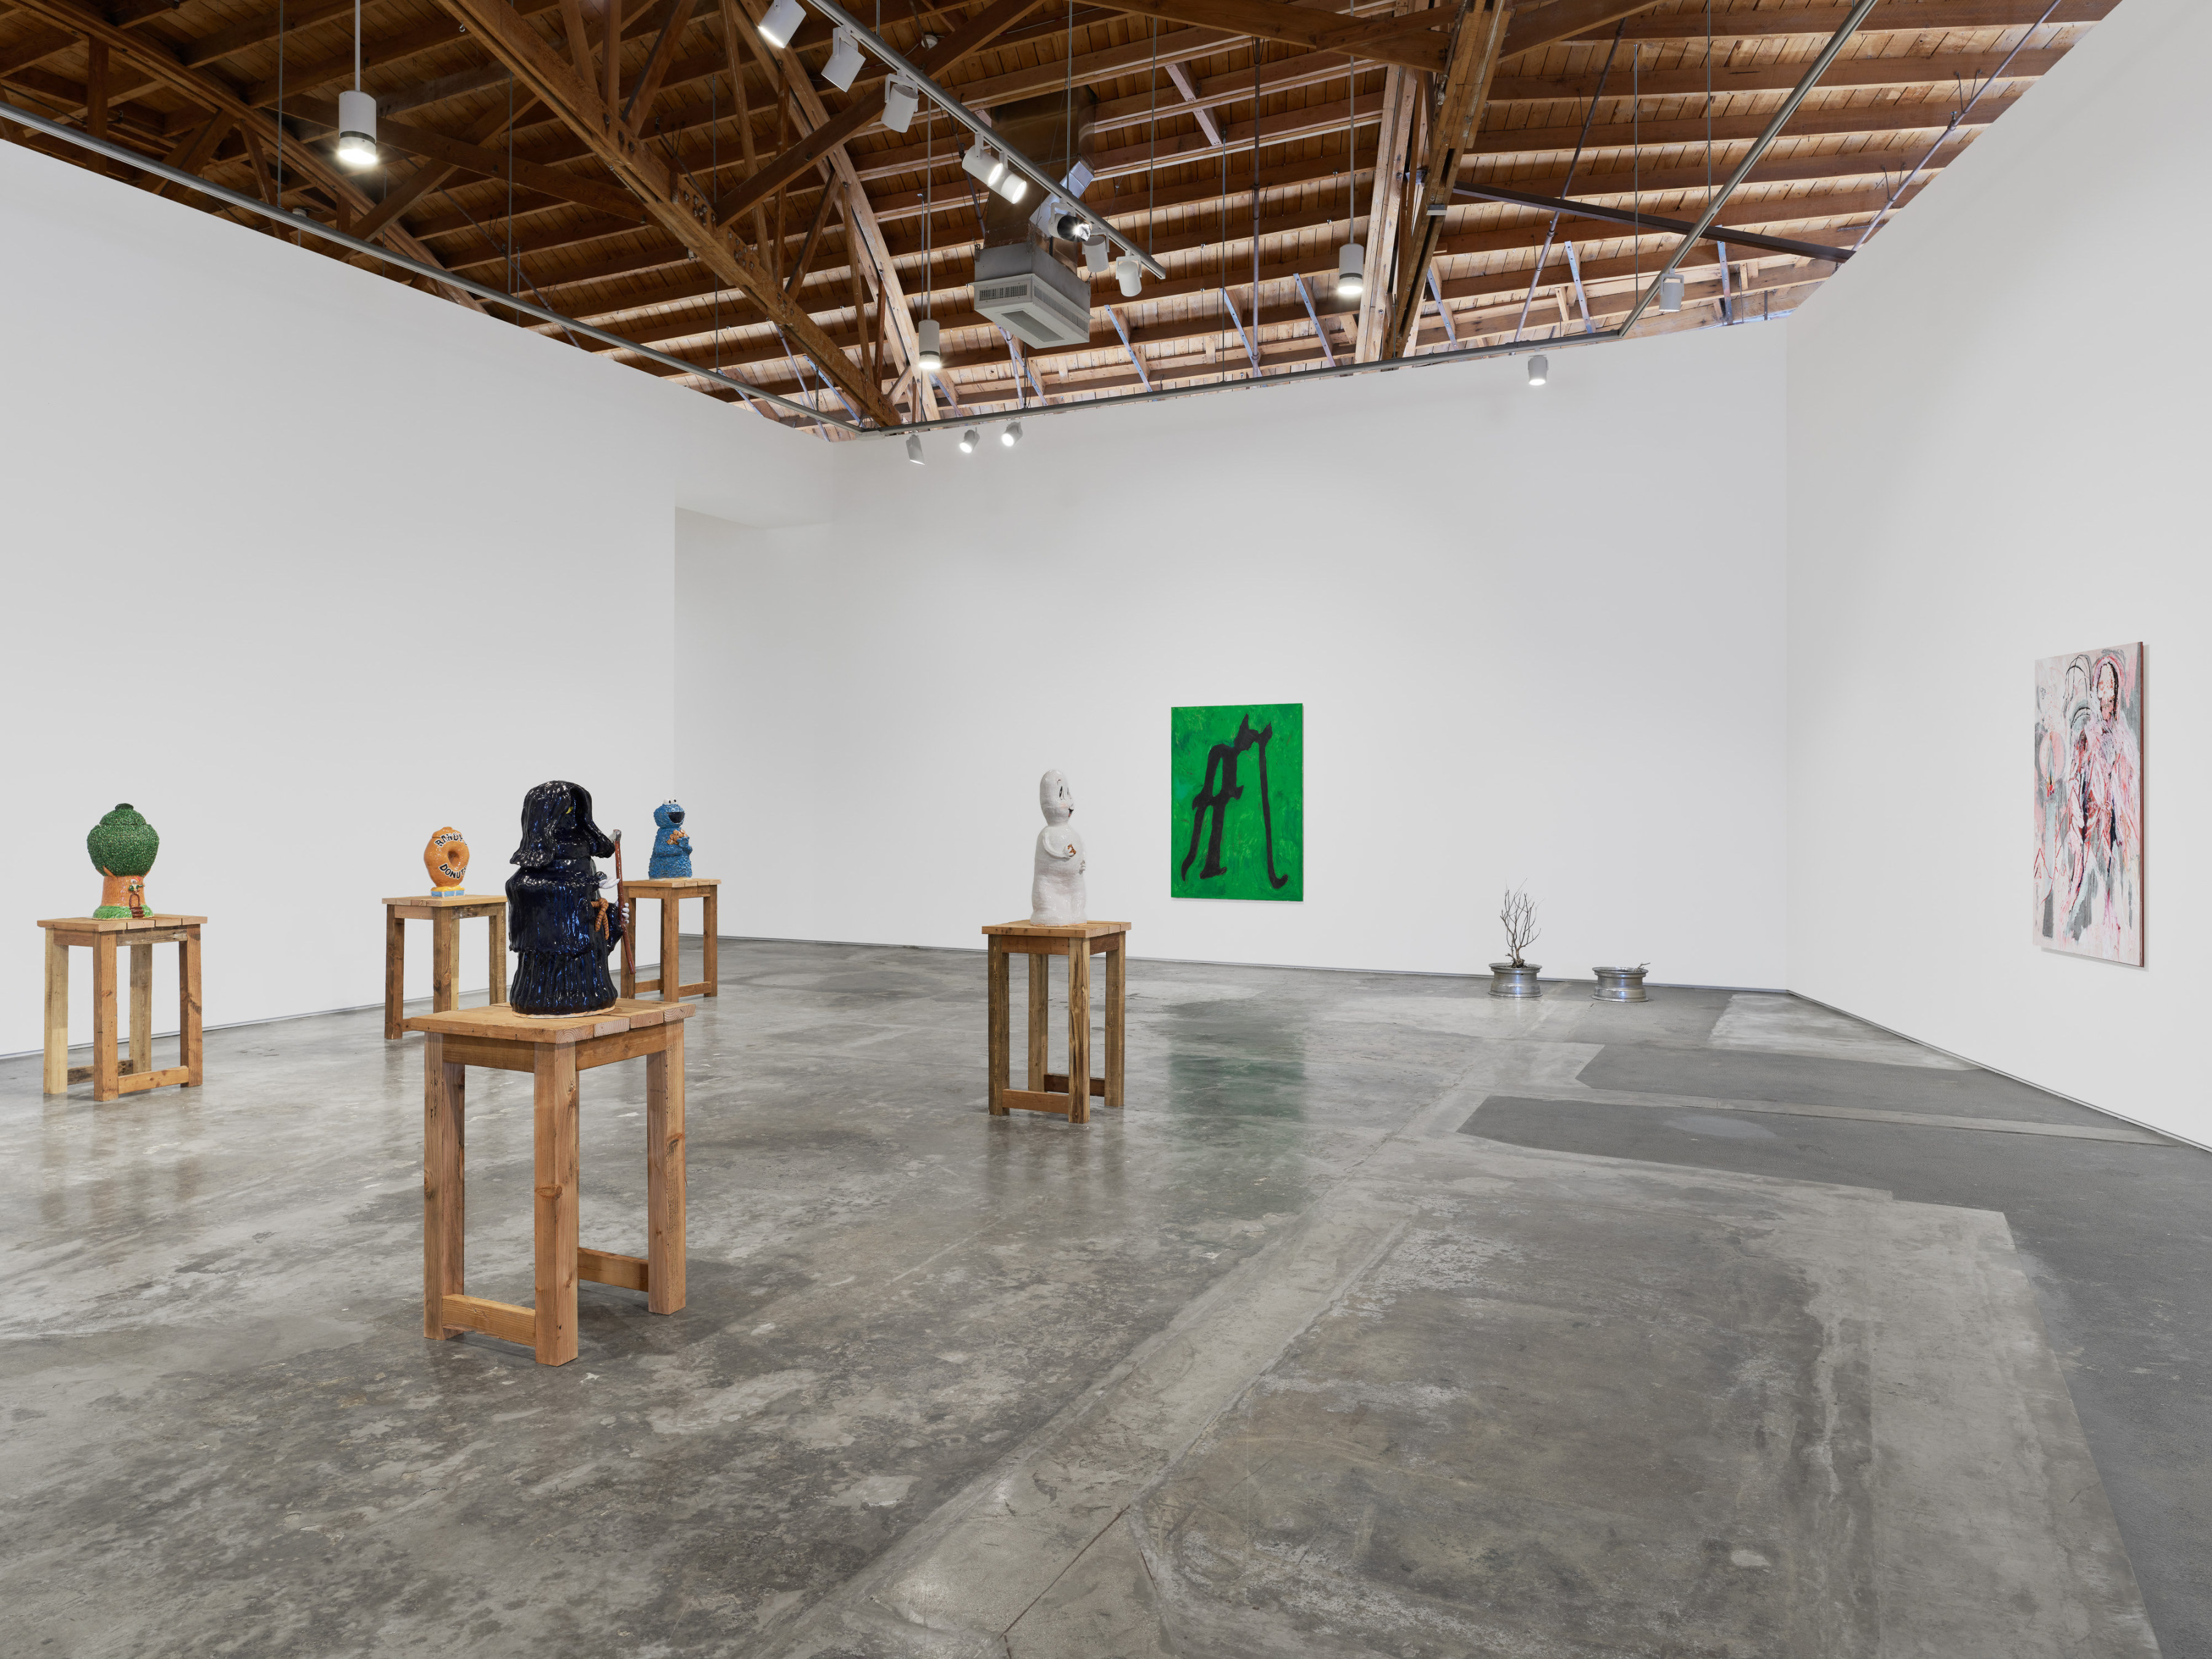 Installation view of "American Gothic"